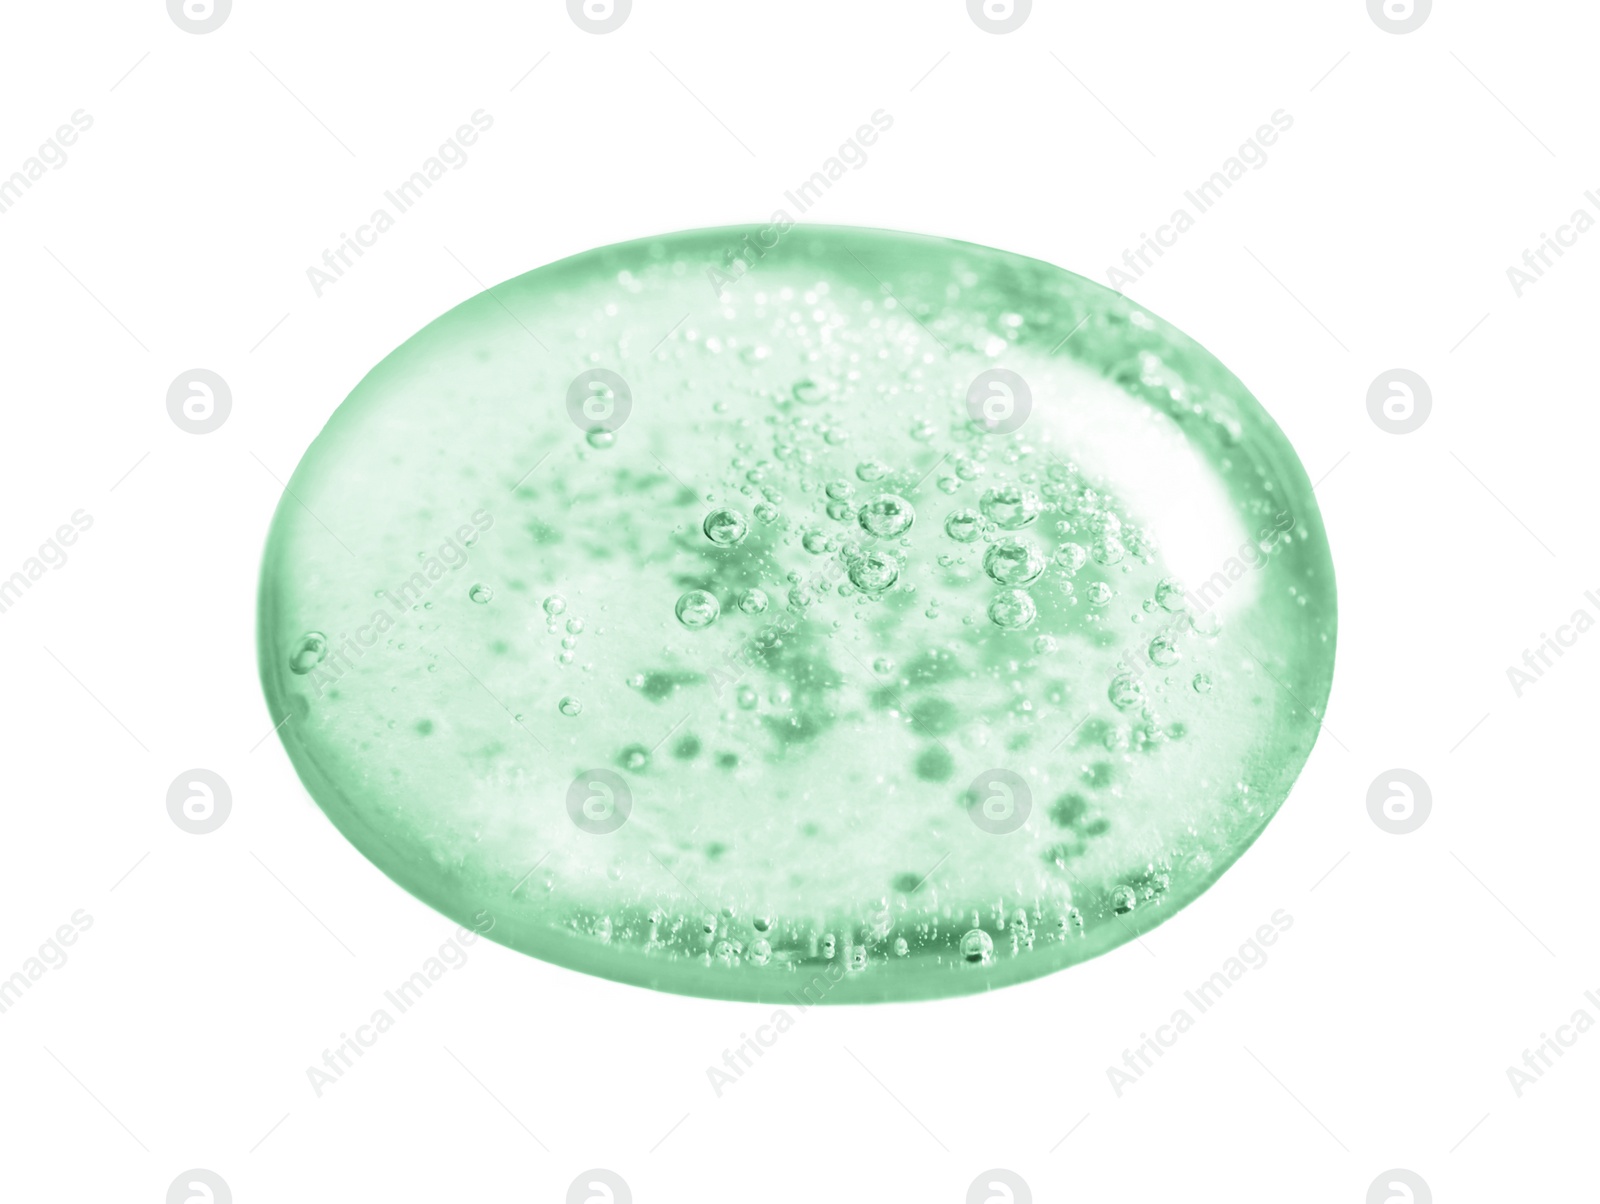 Image of Serum drop on white background. Skin care product